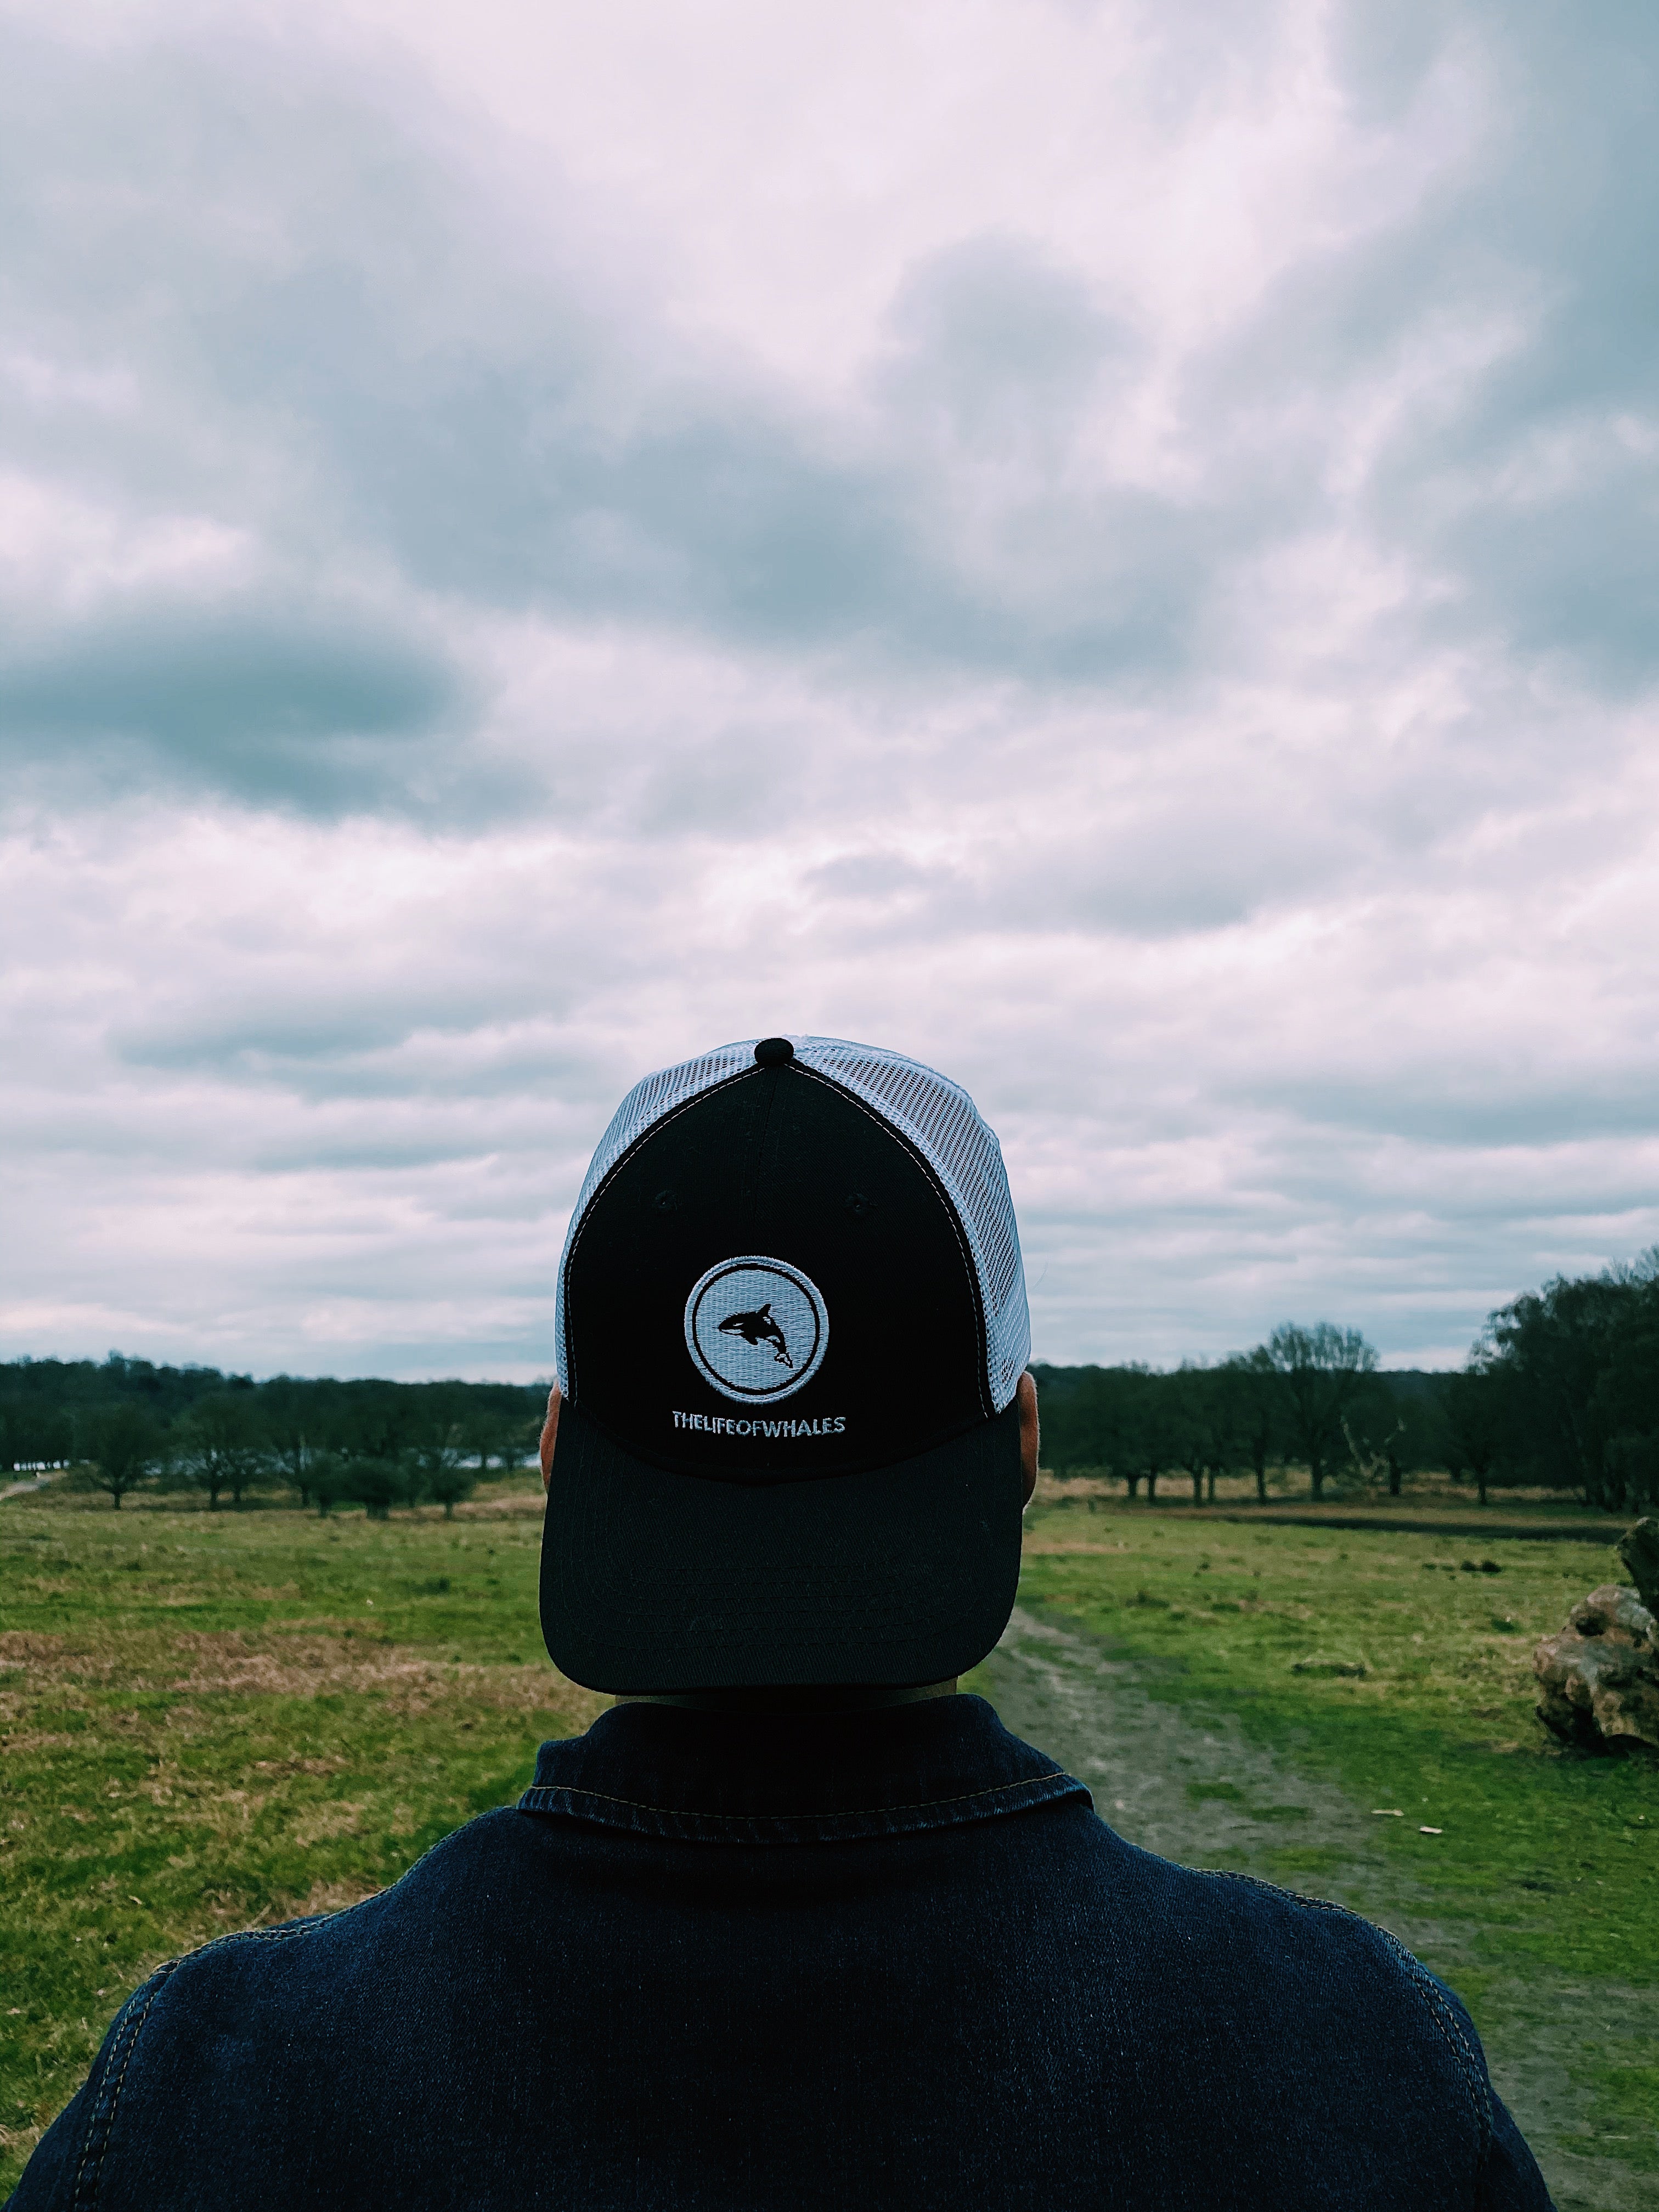 TheLifeofWhales Official Trucker Cap